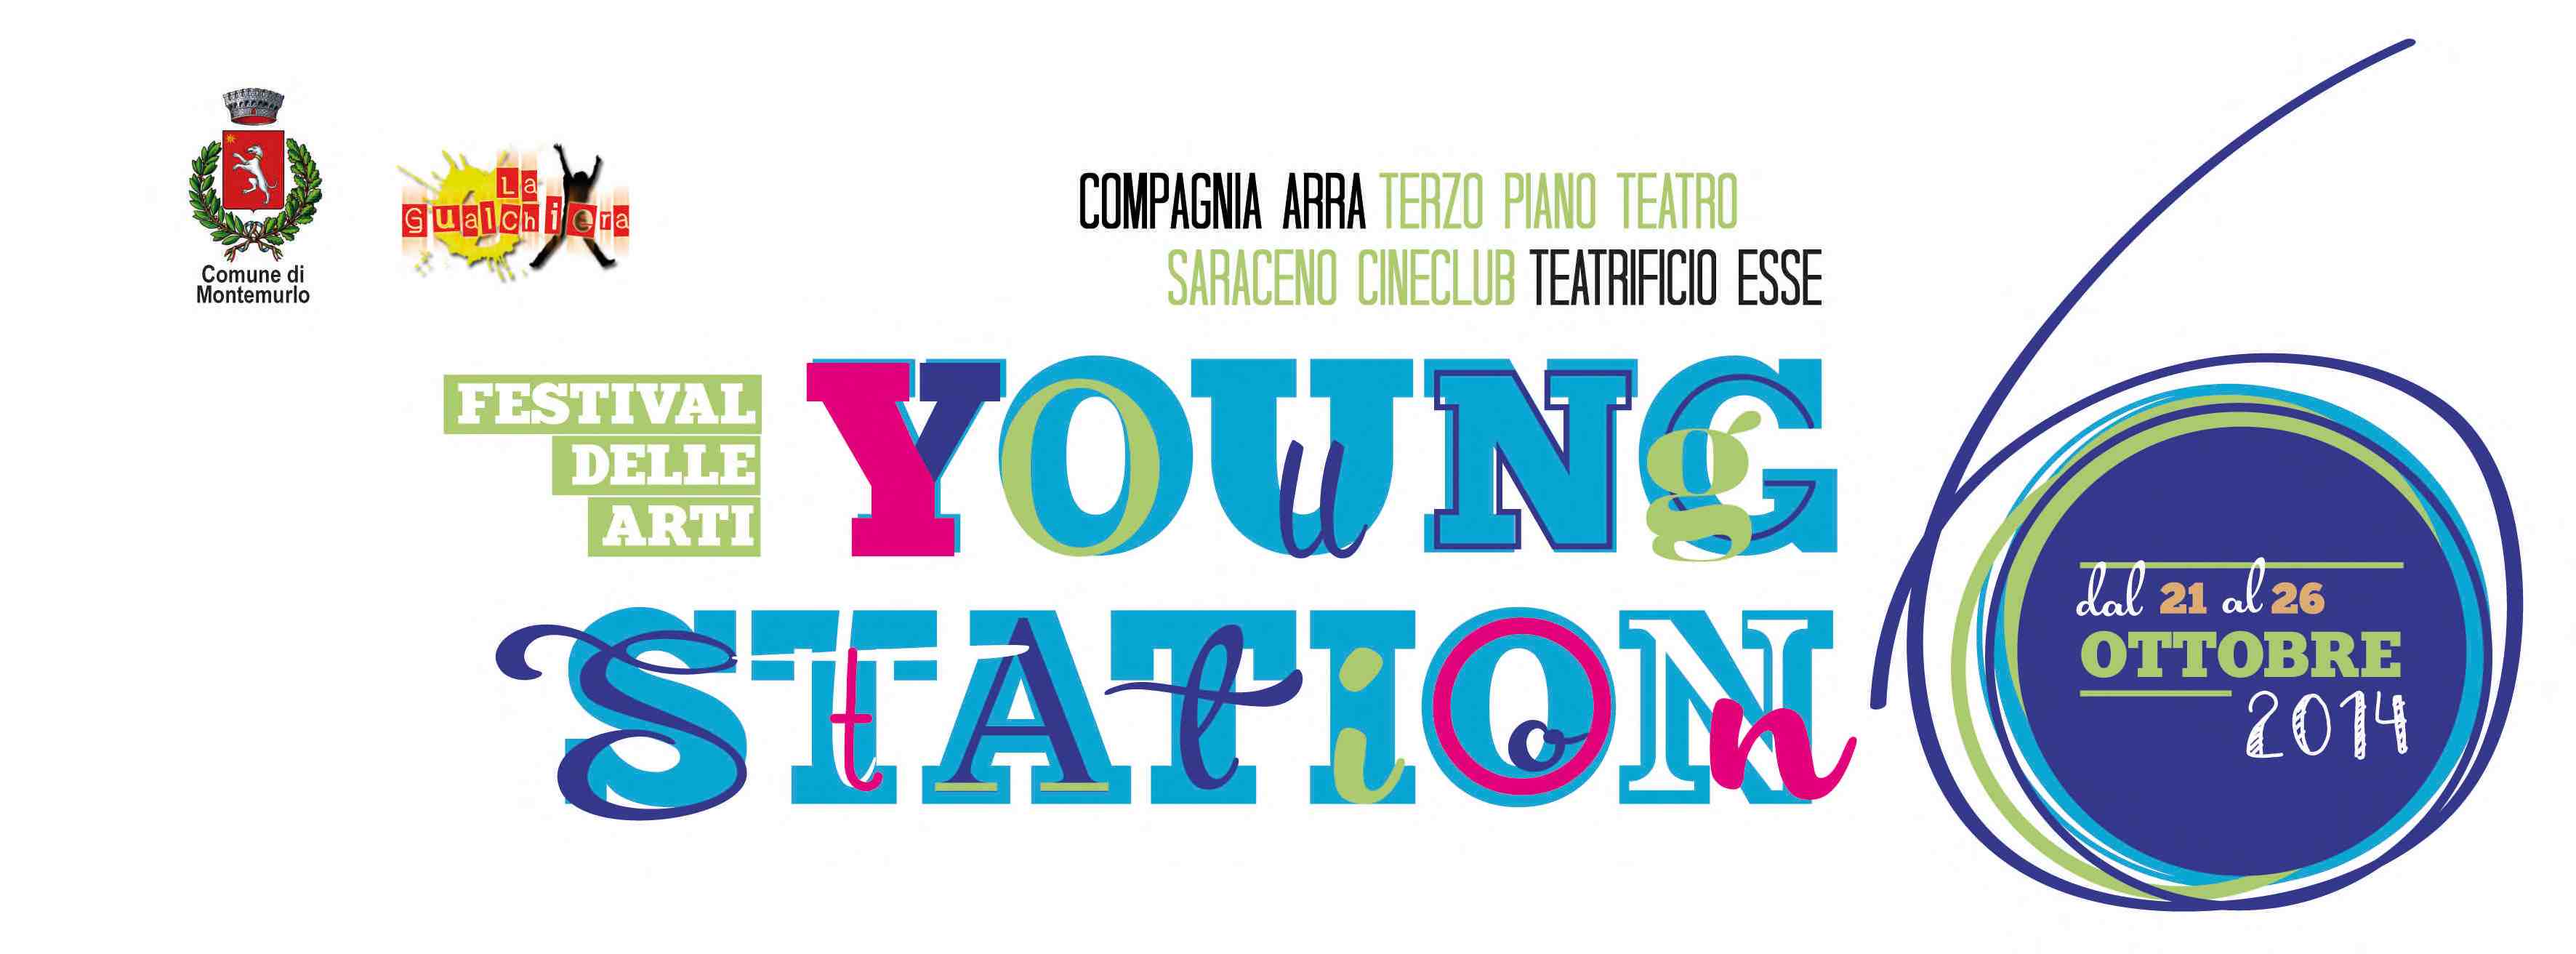 Festival Young Station 6